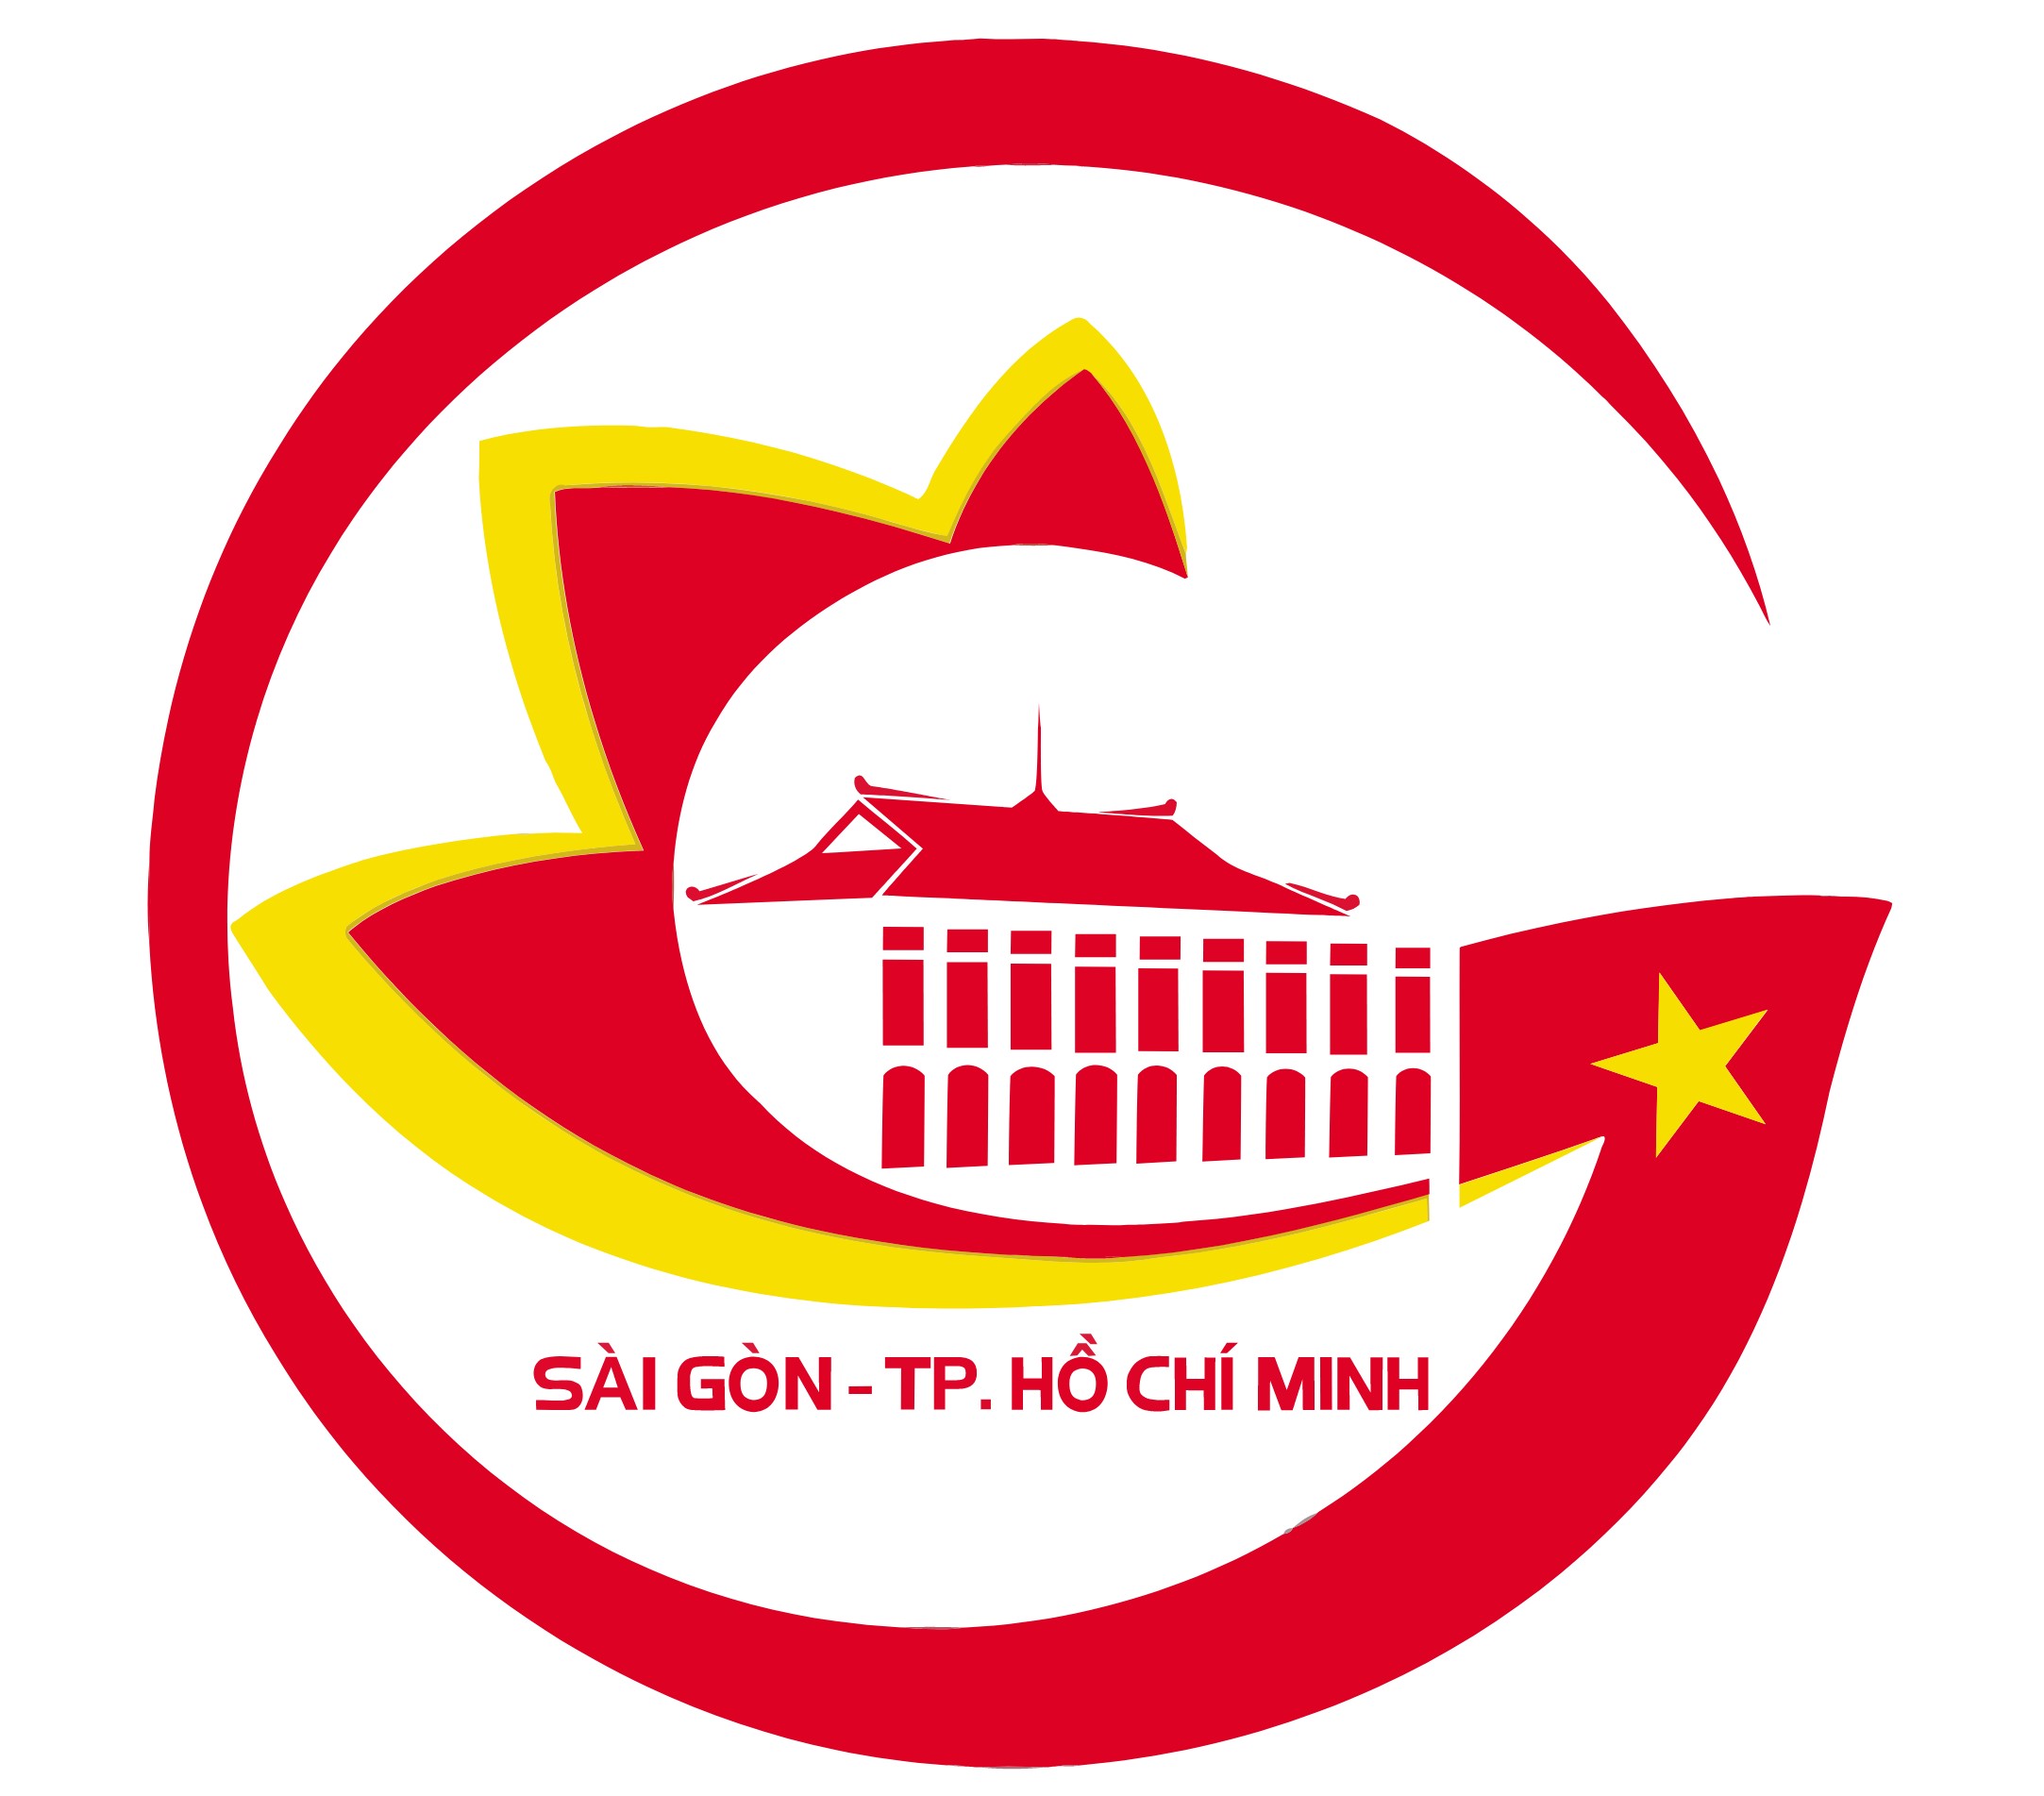 Official seal of Ho Chi Minh City